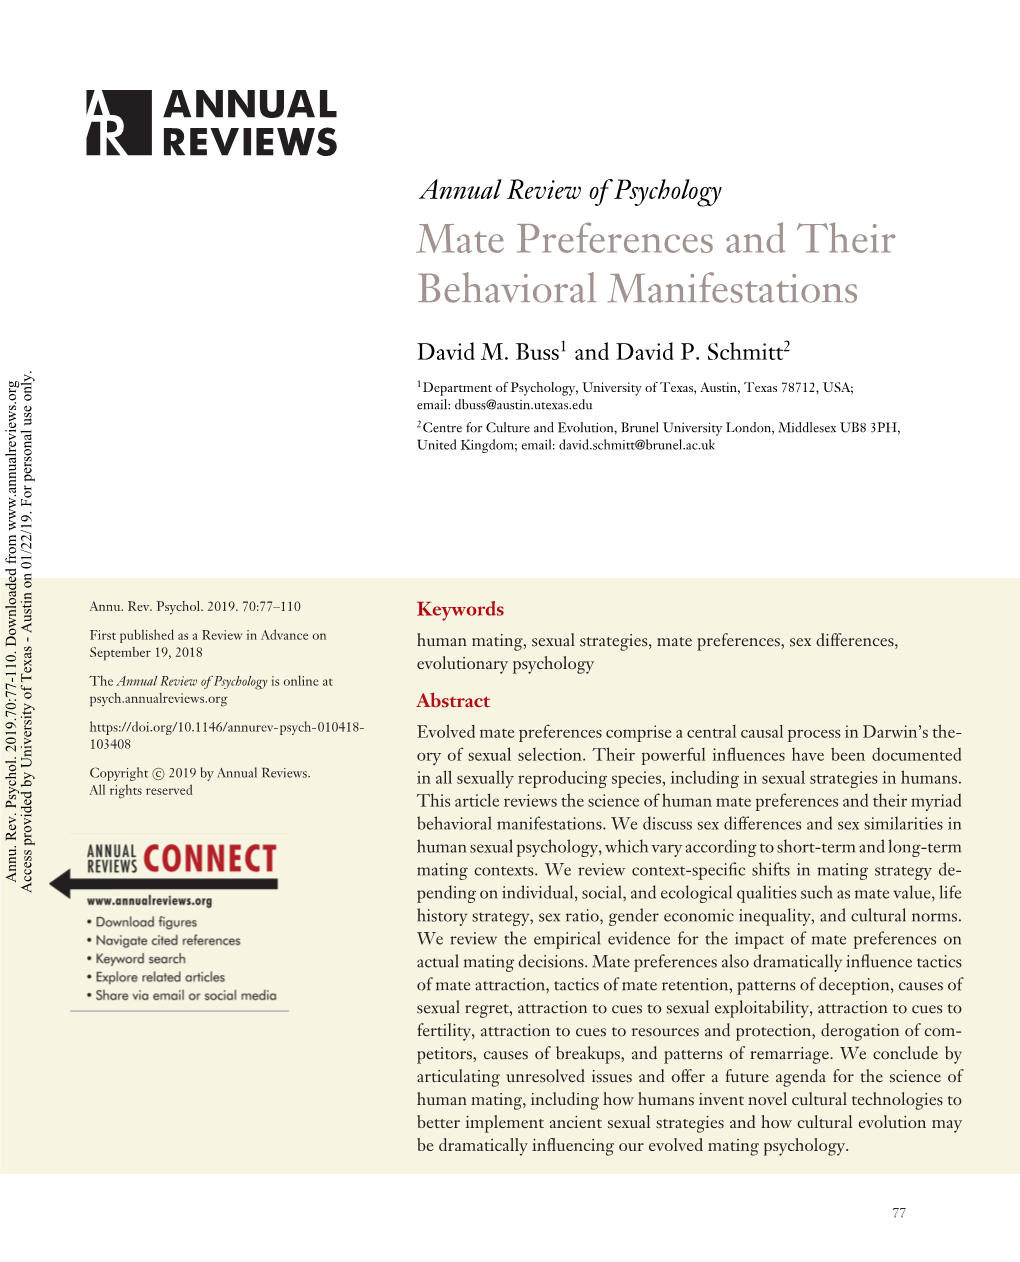 Mate Preferences and Their Behavioral Manifestations